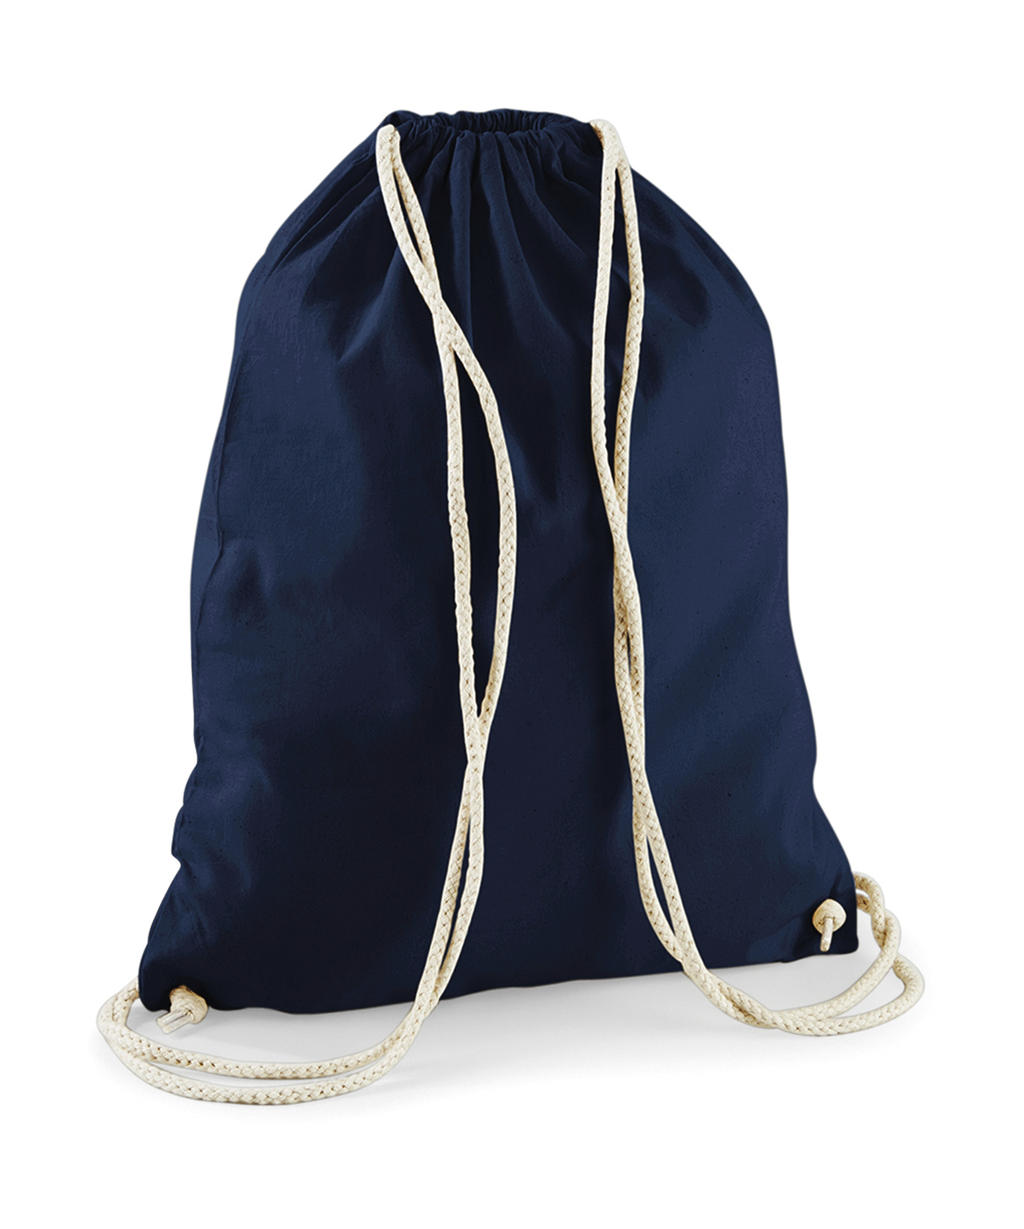  Cotton Gymsac in Farbe French Navy